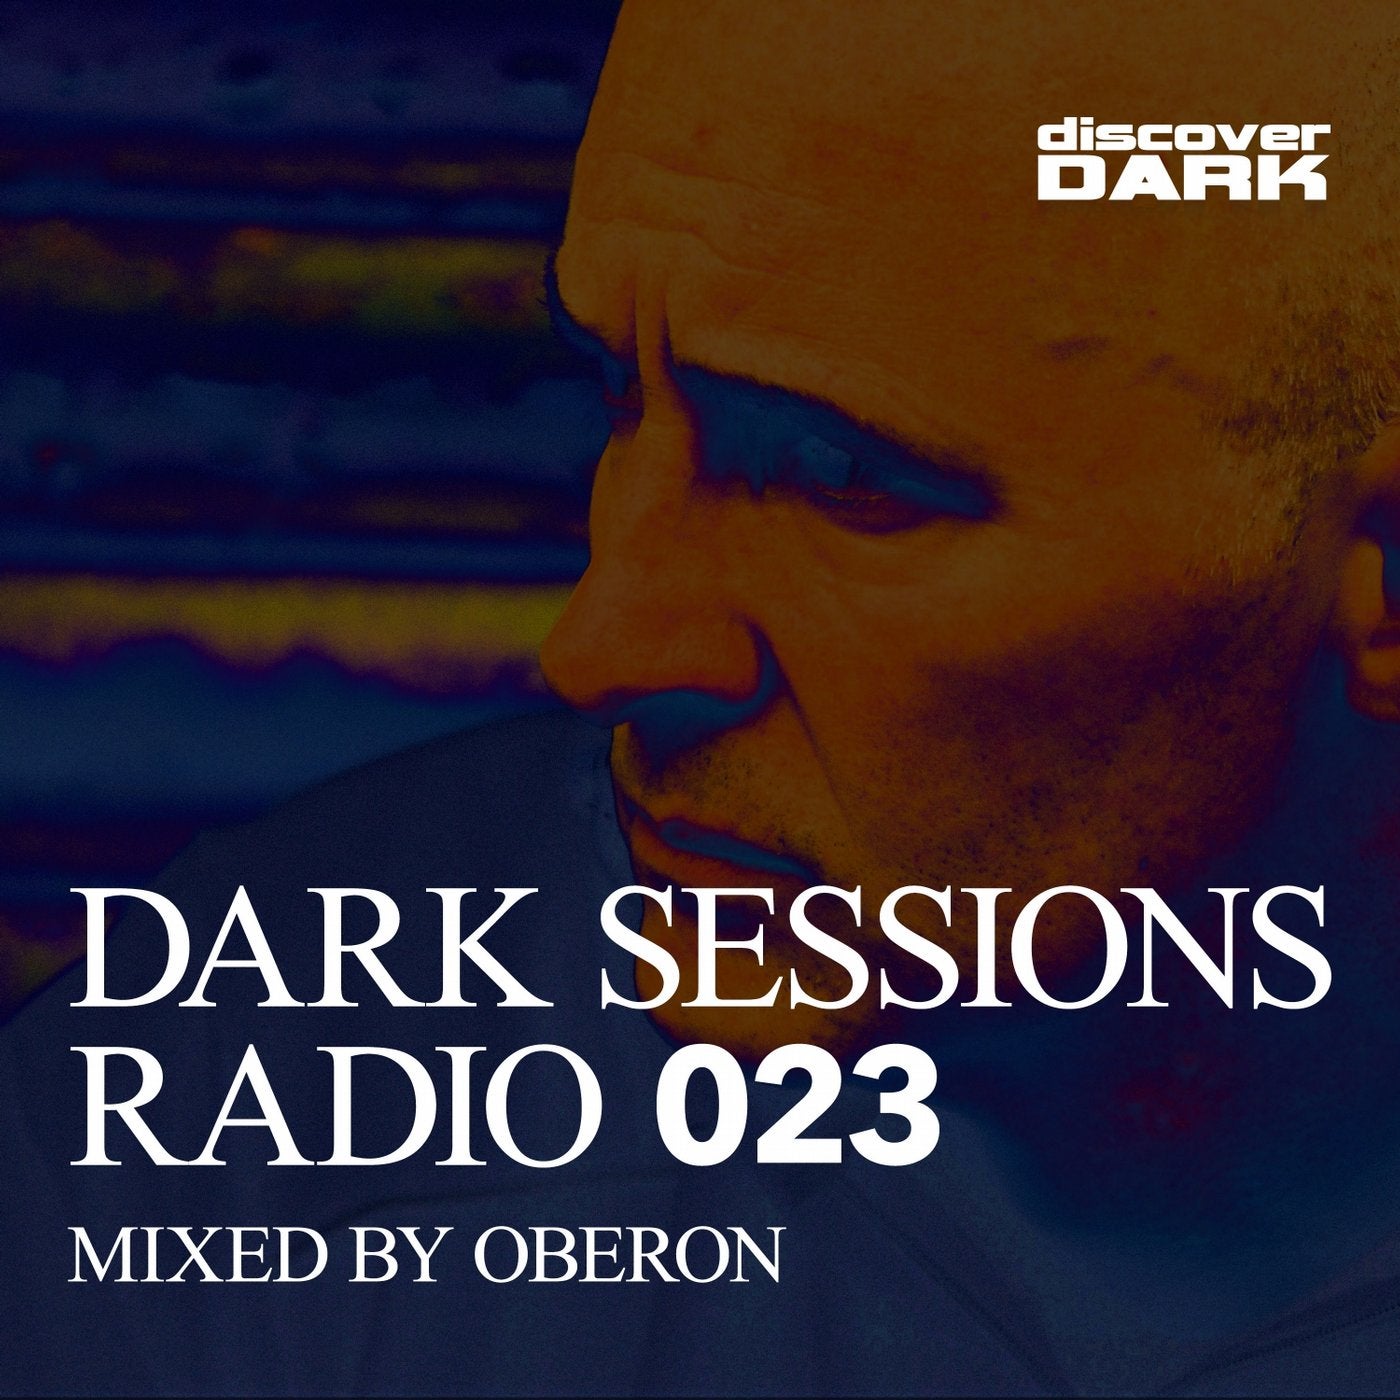 Dark Sessions Radio 023 (Mixed by Oberon)